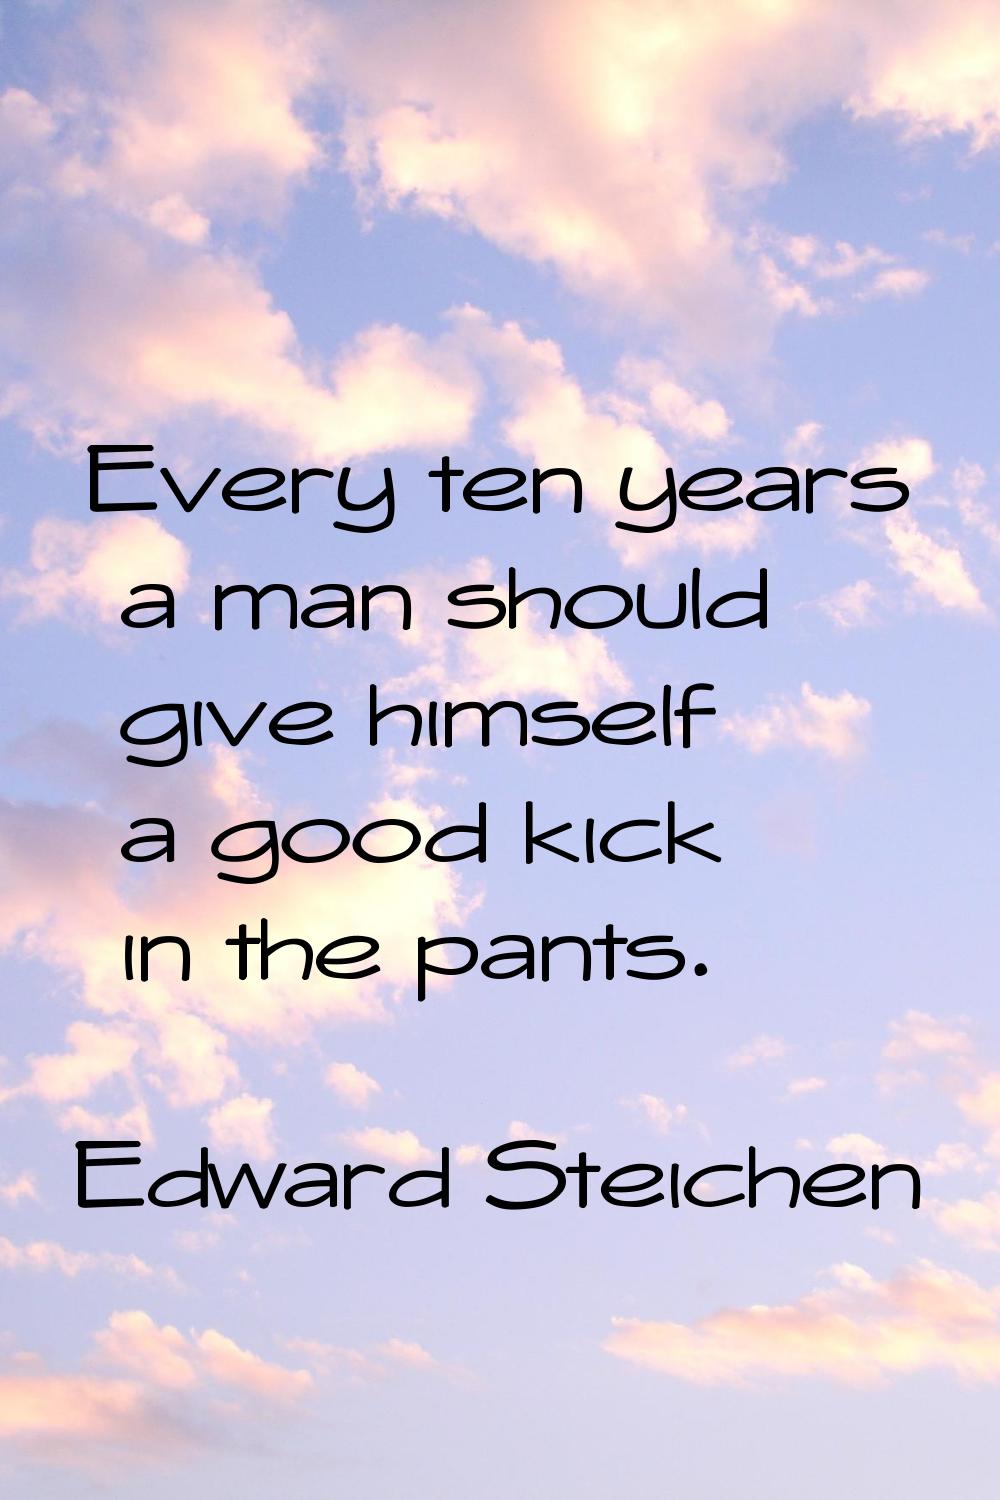 Every ten years a man should give himself a good kick in the pants.